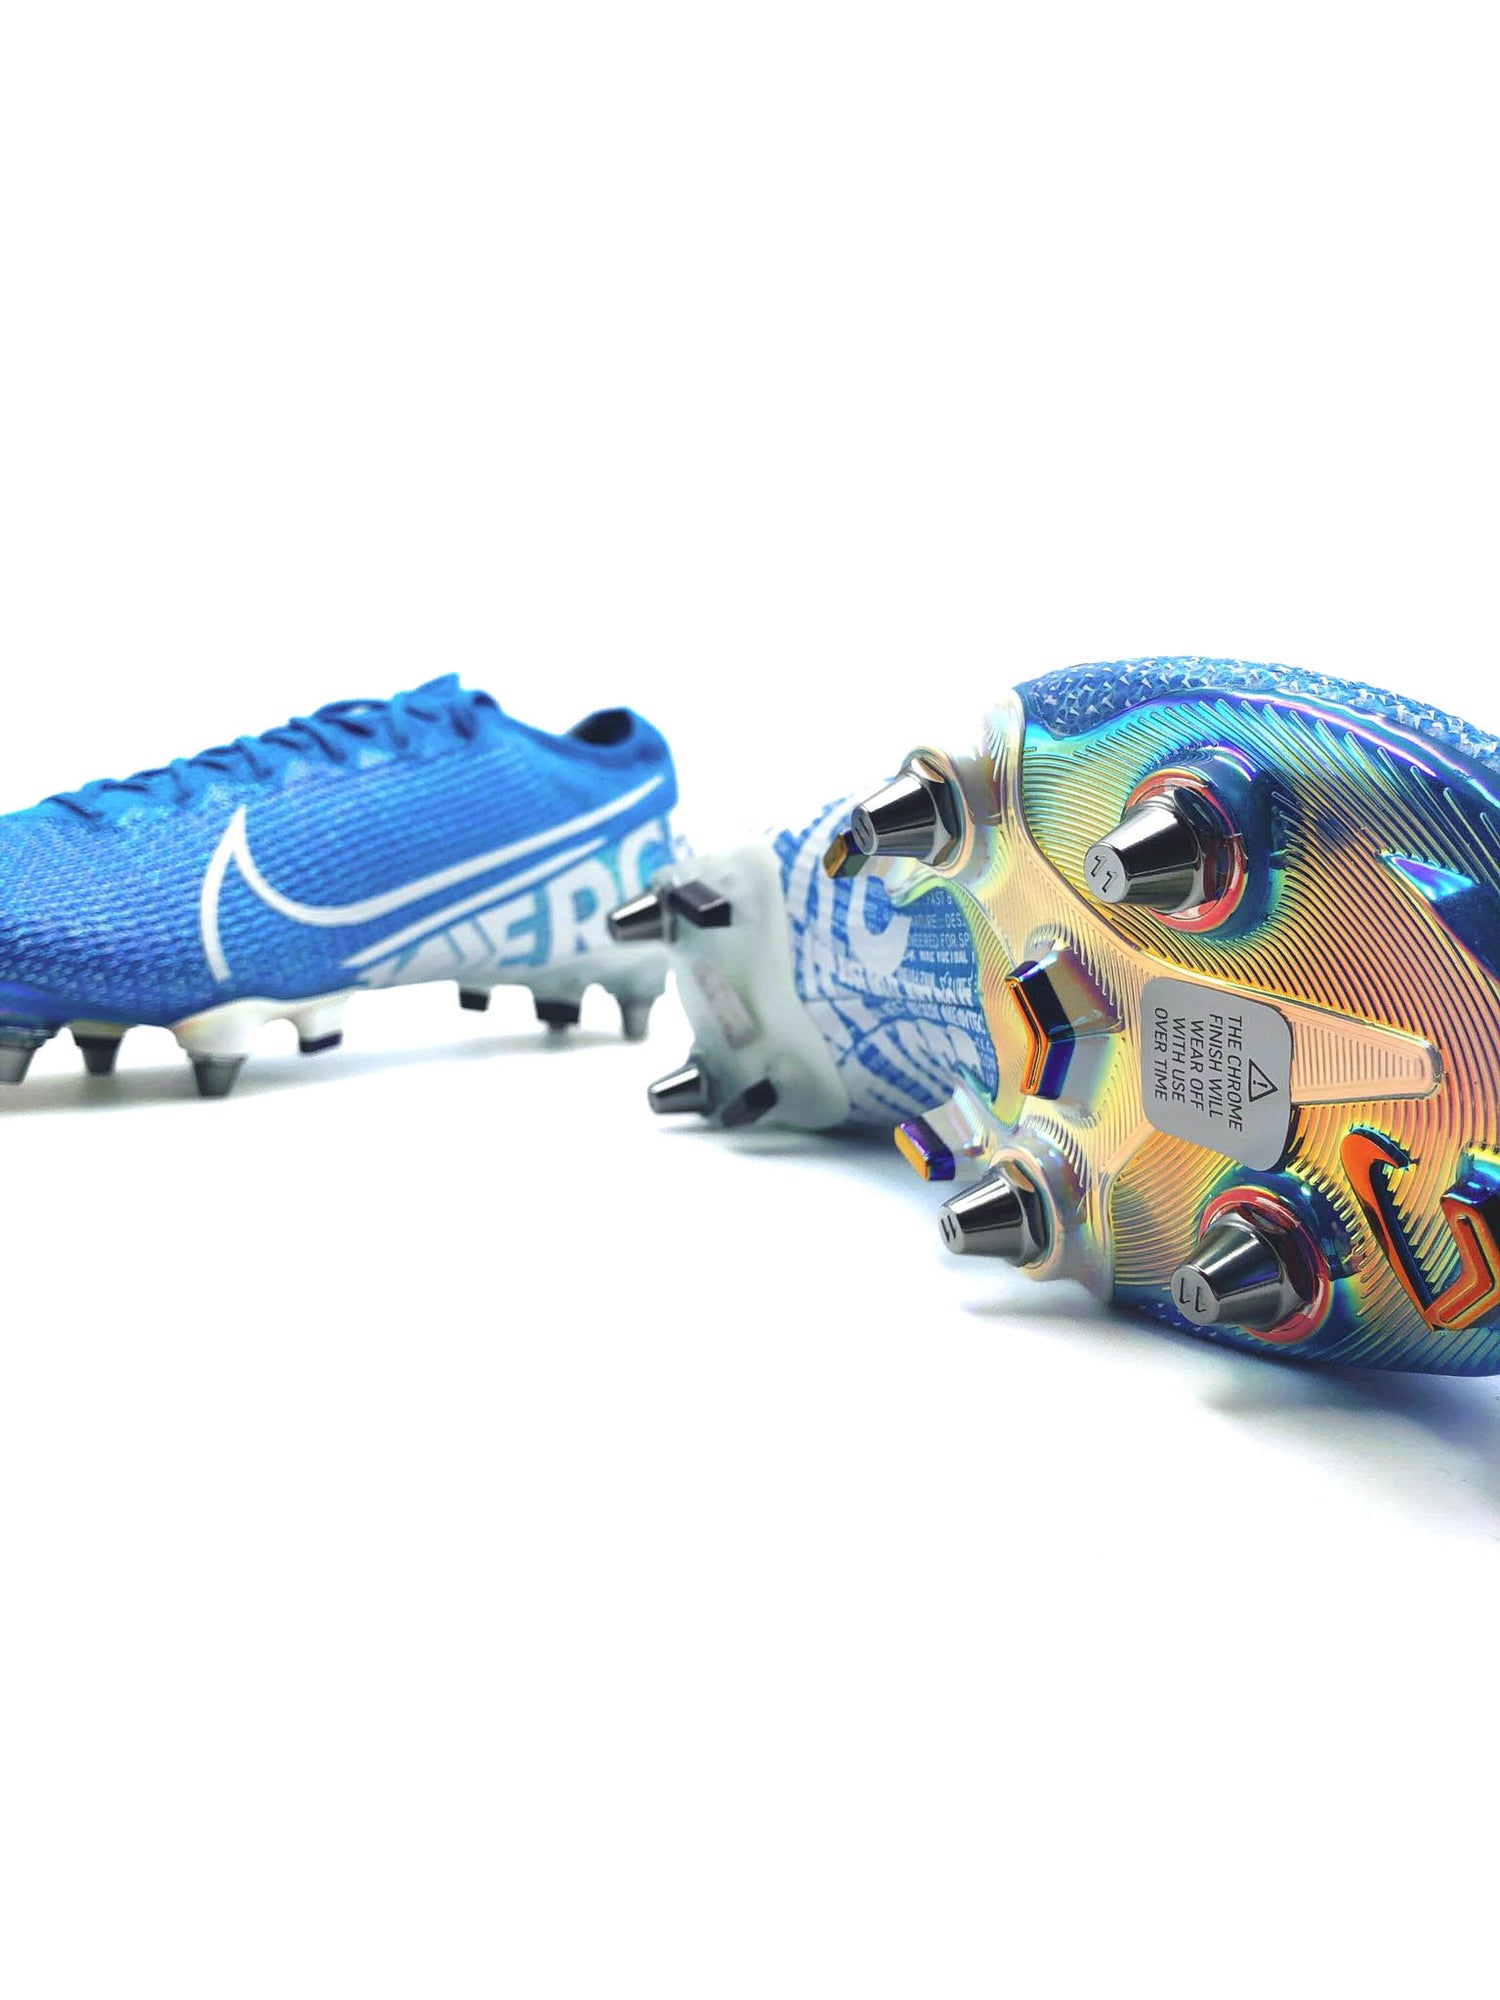 Nike Football Boot Selector  Choose your perfect boot